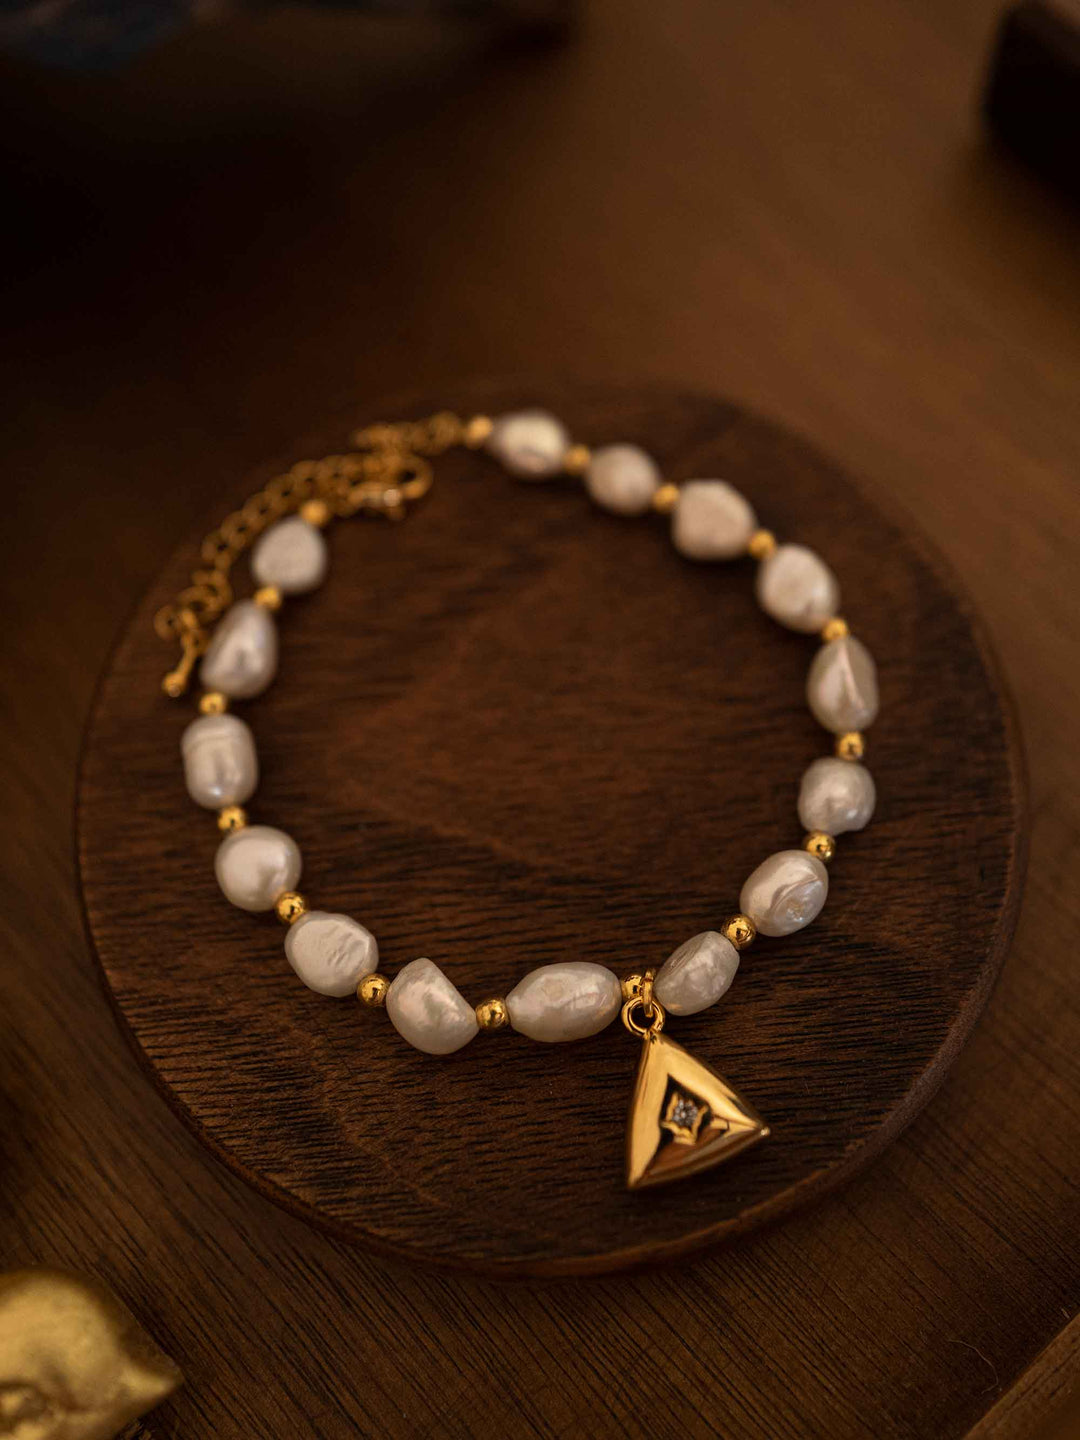 A pearl bracelet with a triangular pendant